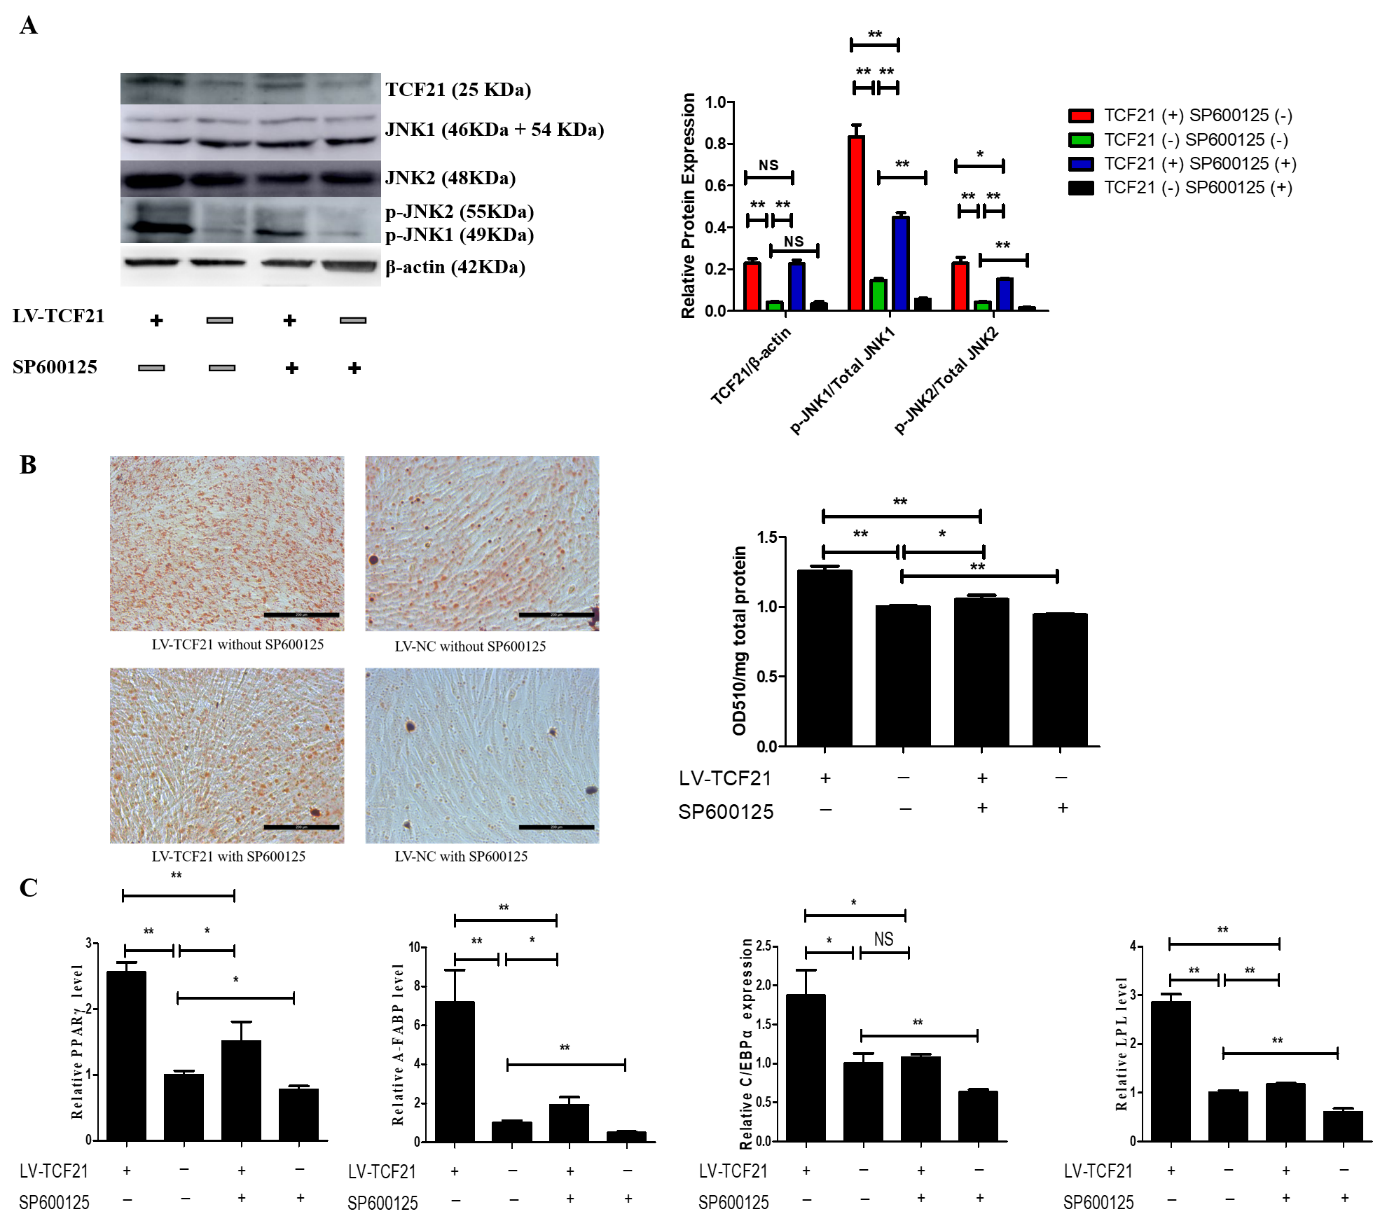 Inhibition of MAPK/JNK signaling attenuates TCF21-mediated enhancement of preadipocyte differentiation. At 24 h post-induction of differentiation, LV-TCF21 and LV-control preadipocytes were then incubated for an additional 24 h in differentiation medium containing either 0μM or 10μM SP600125. (A) Images for JNK1, JNK2, p-JNK1, p-JNK2, and β-actin expressions in LV-control or LV-TCF21 cells treated with 0μM or 10μM SP600126 by western blotting (representative of three independent experiments). Then the bands intensities were quantified by Image J software. Graphs are plotted as mean ± SE from three independent experiments. NS, no significance, * P < 0.05, ** P < 0.01; (B) Images for oil-red O staining of lipid droplets in differentiated LV-control or LV-TCF21 preadipocytes treated with 0μM or 10μM SP600125 (representative of three independent experiments). Then oil-red O dye was extracted from the cells in order to quantify staining intensity. Graphs are plotted as mean ± SE from three independent experiments relative to staining intensity of LV-control treated with 0μM SP600125. * P < 0.05, ** P < 0.01; (C) Expressions of pro-adipogenic genes in differentiated LV-control or LV-TCF21 preadipocytes treated with 0μM or 10μM SP600125 by real-time PCR. Graphs are plotted as mean ± SE from three independent experiments relative to the gene expression in LV-control treated with 0μM SP600125. NS, no significance, * P < 0.05, ** P < 0.01.